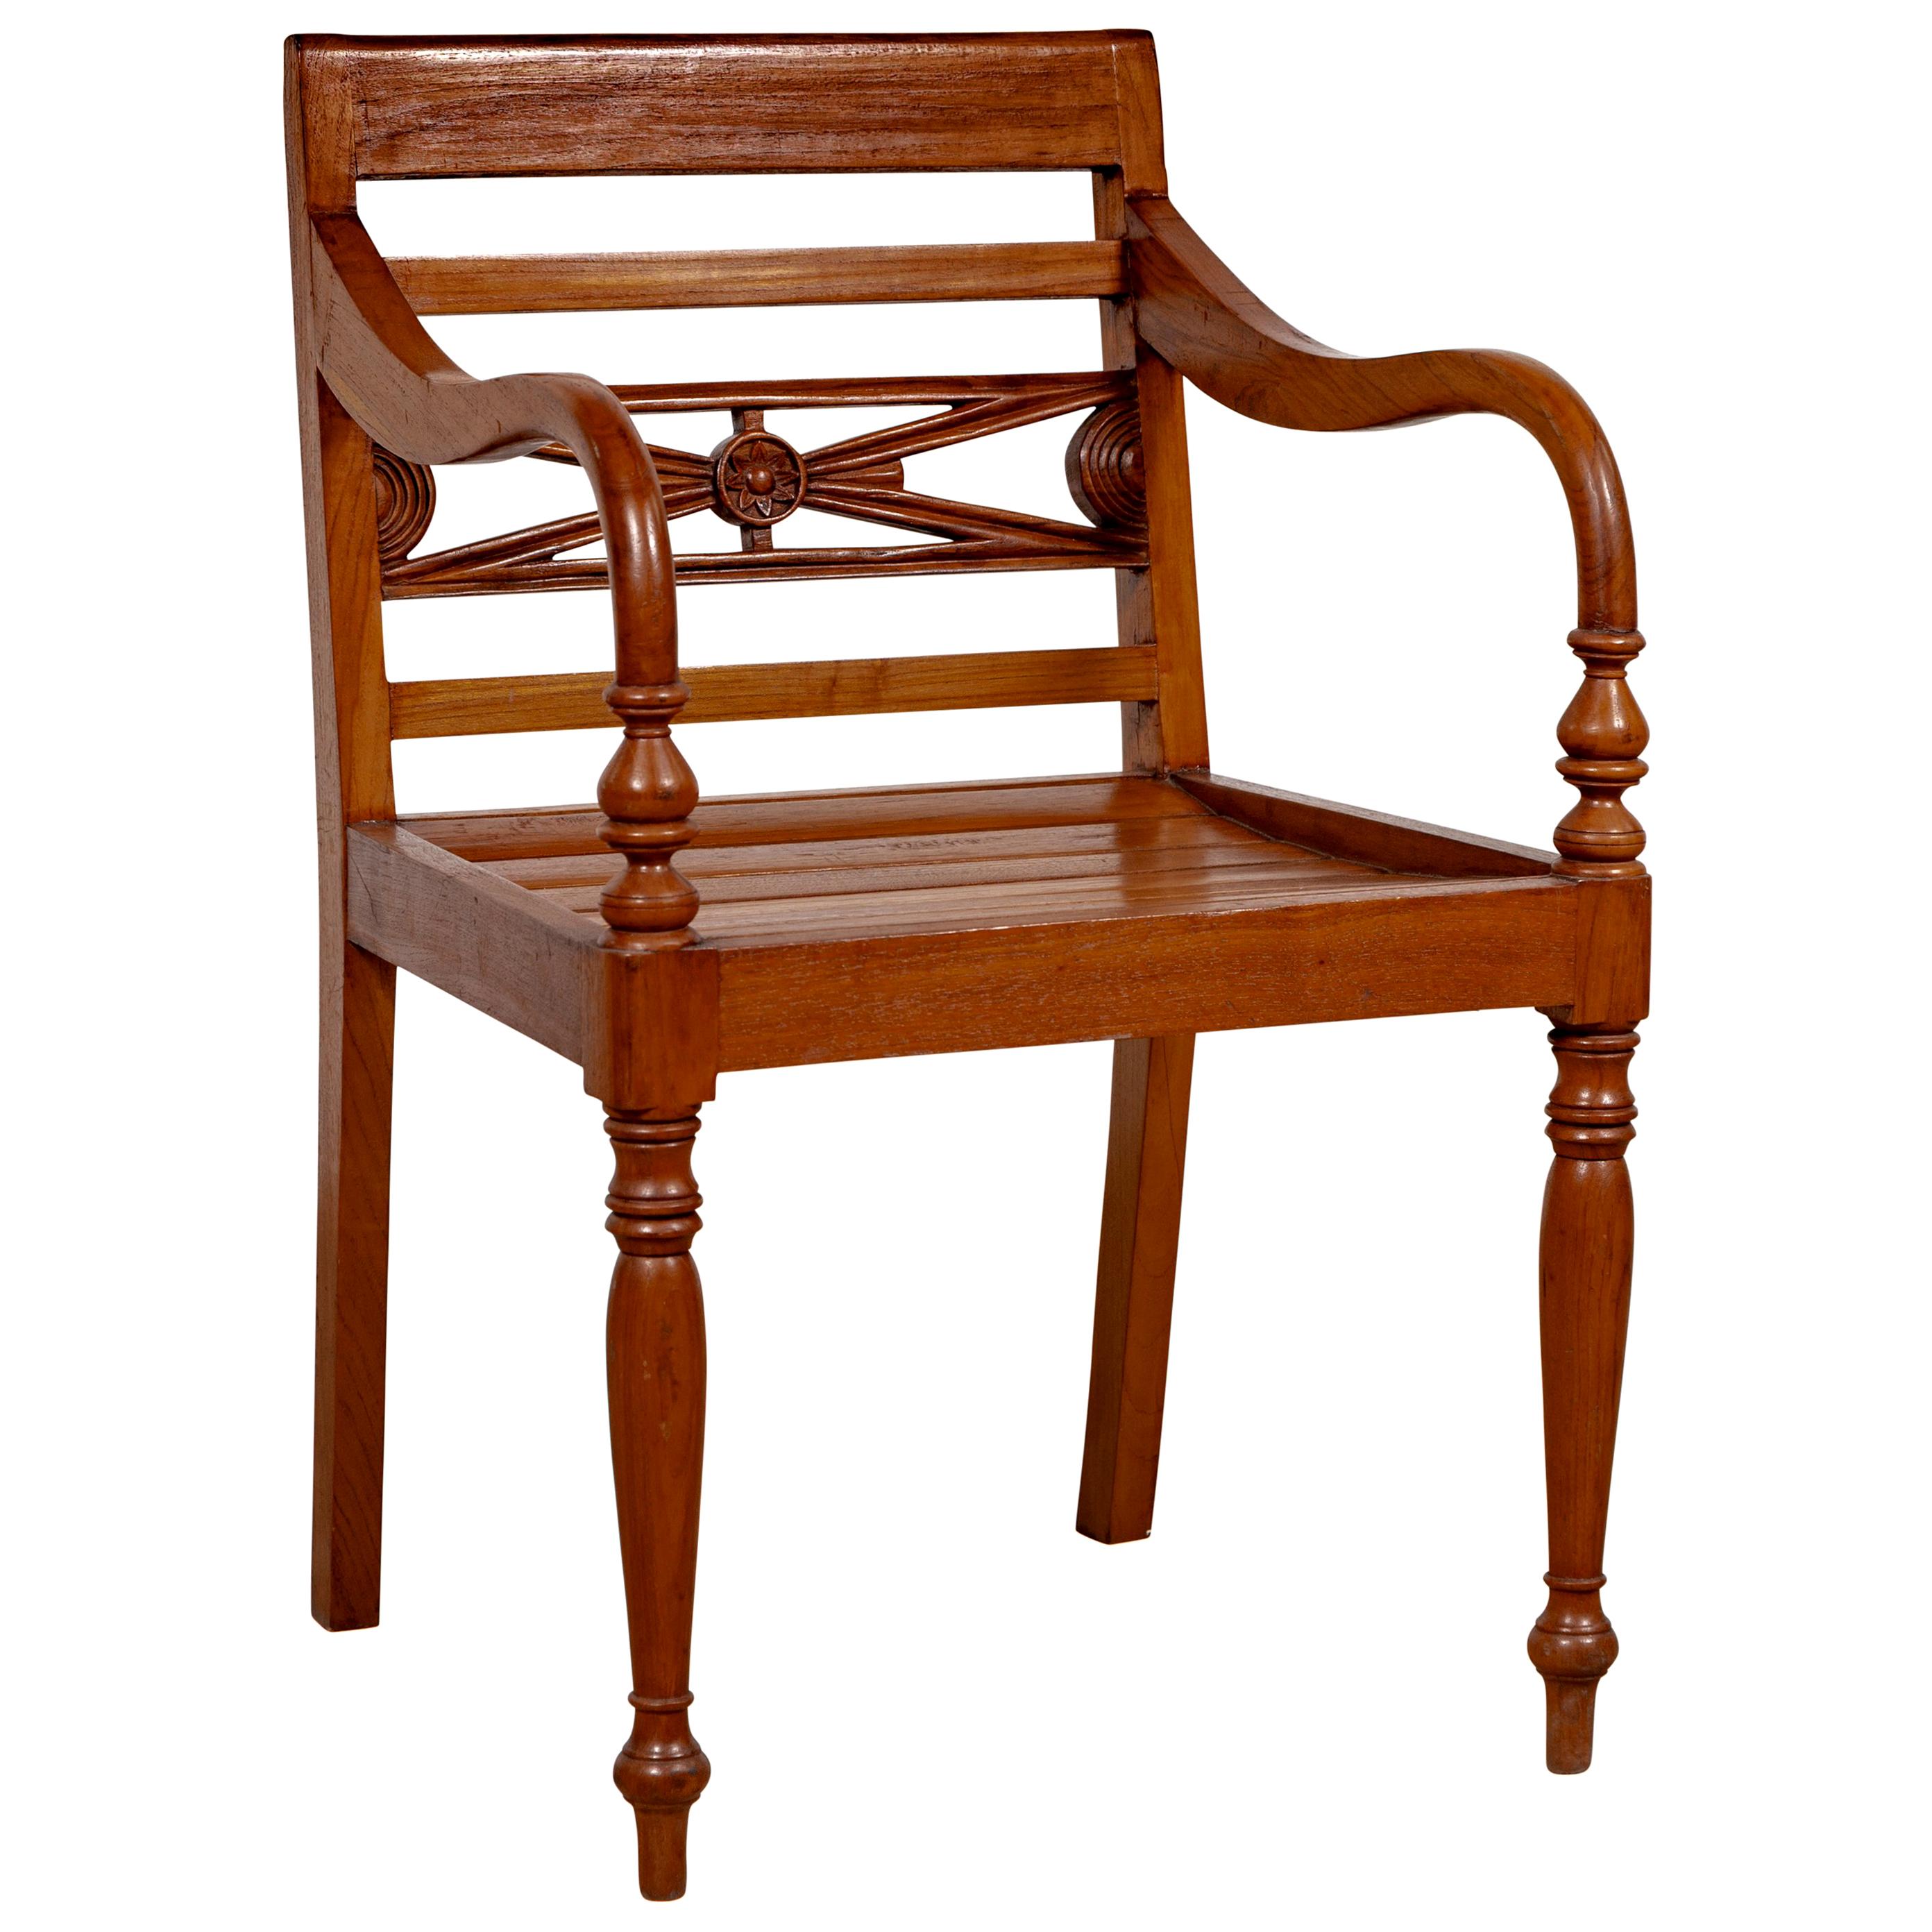 Early 20th Century Captain's Chair from Bali with Slatted Wood and Loop Arms For Sale